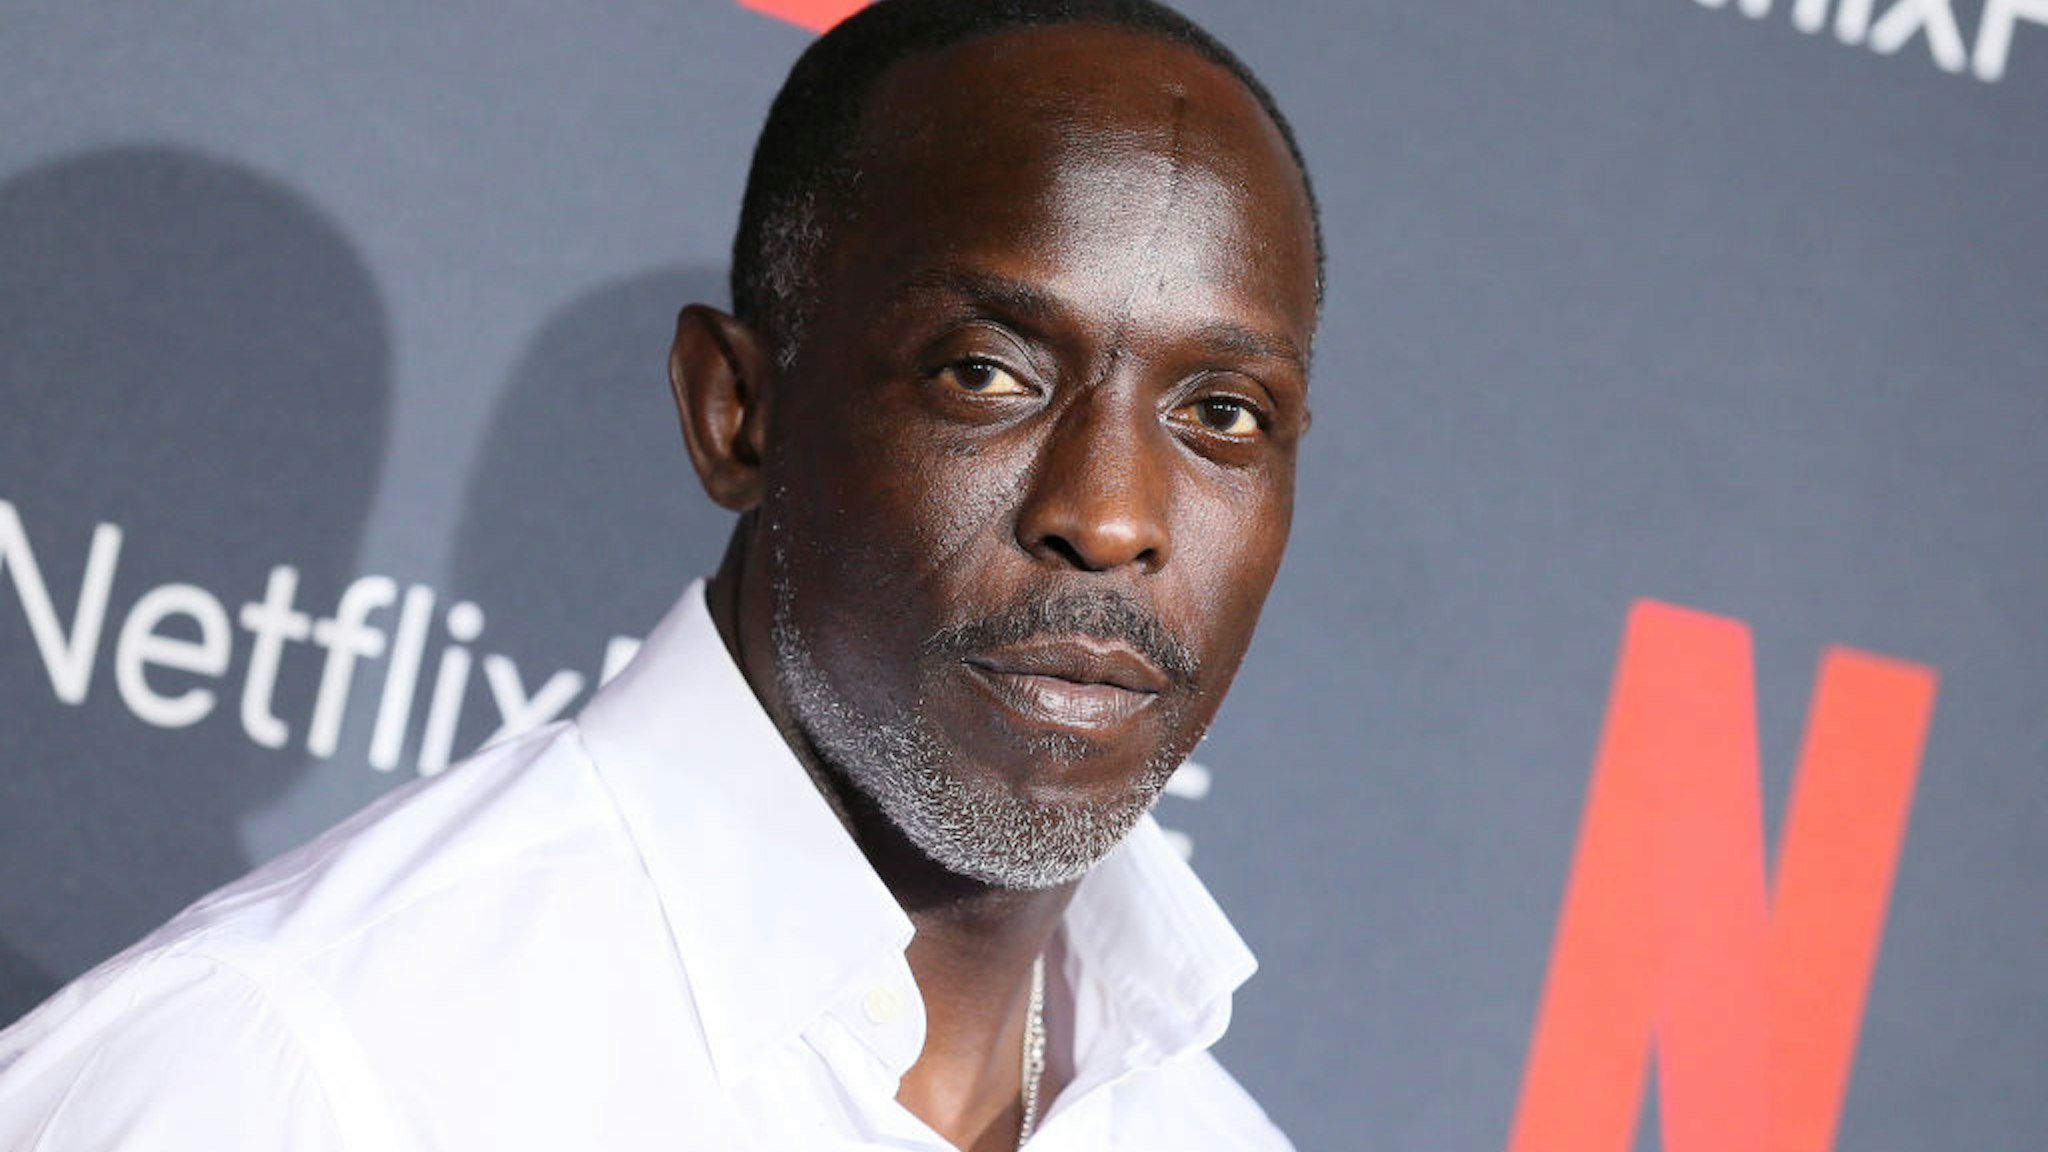 Michael K. Williams attends Netflix's FYSEE event for "When They See Us" at Netflix FYSEE at Raleigh Studios on June 09, 2019 in Los Angeles, California.